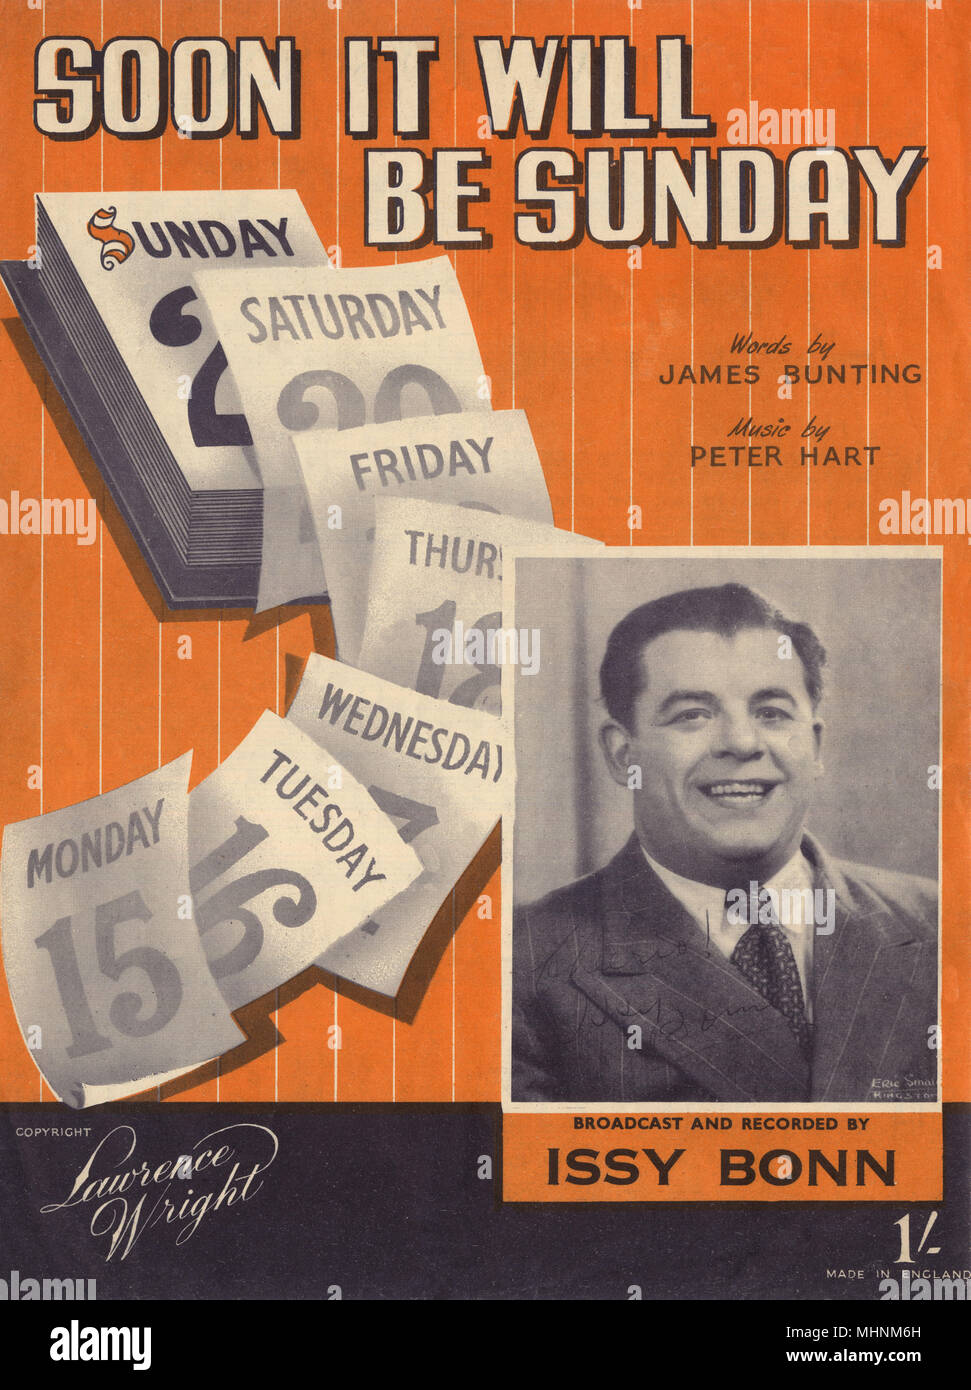 'Soon it will be Sunday' - Music Sheet Cover, words by James Bunting, music by Peter Hart, copyright by Lawrence Wright and broadcast and recorded by Issy Bonn. An illustration with a calender and a photo of Issy Bonn with his signature on the right bottom.     Date: circa 1945 Stock Photo